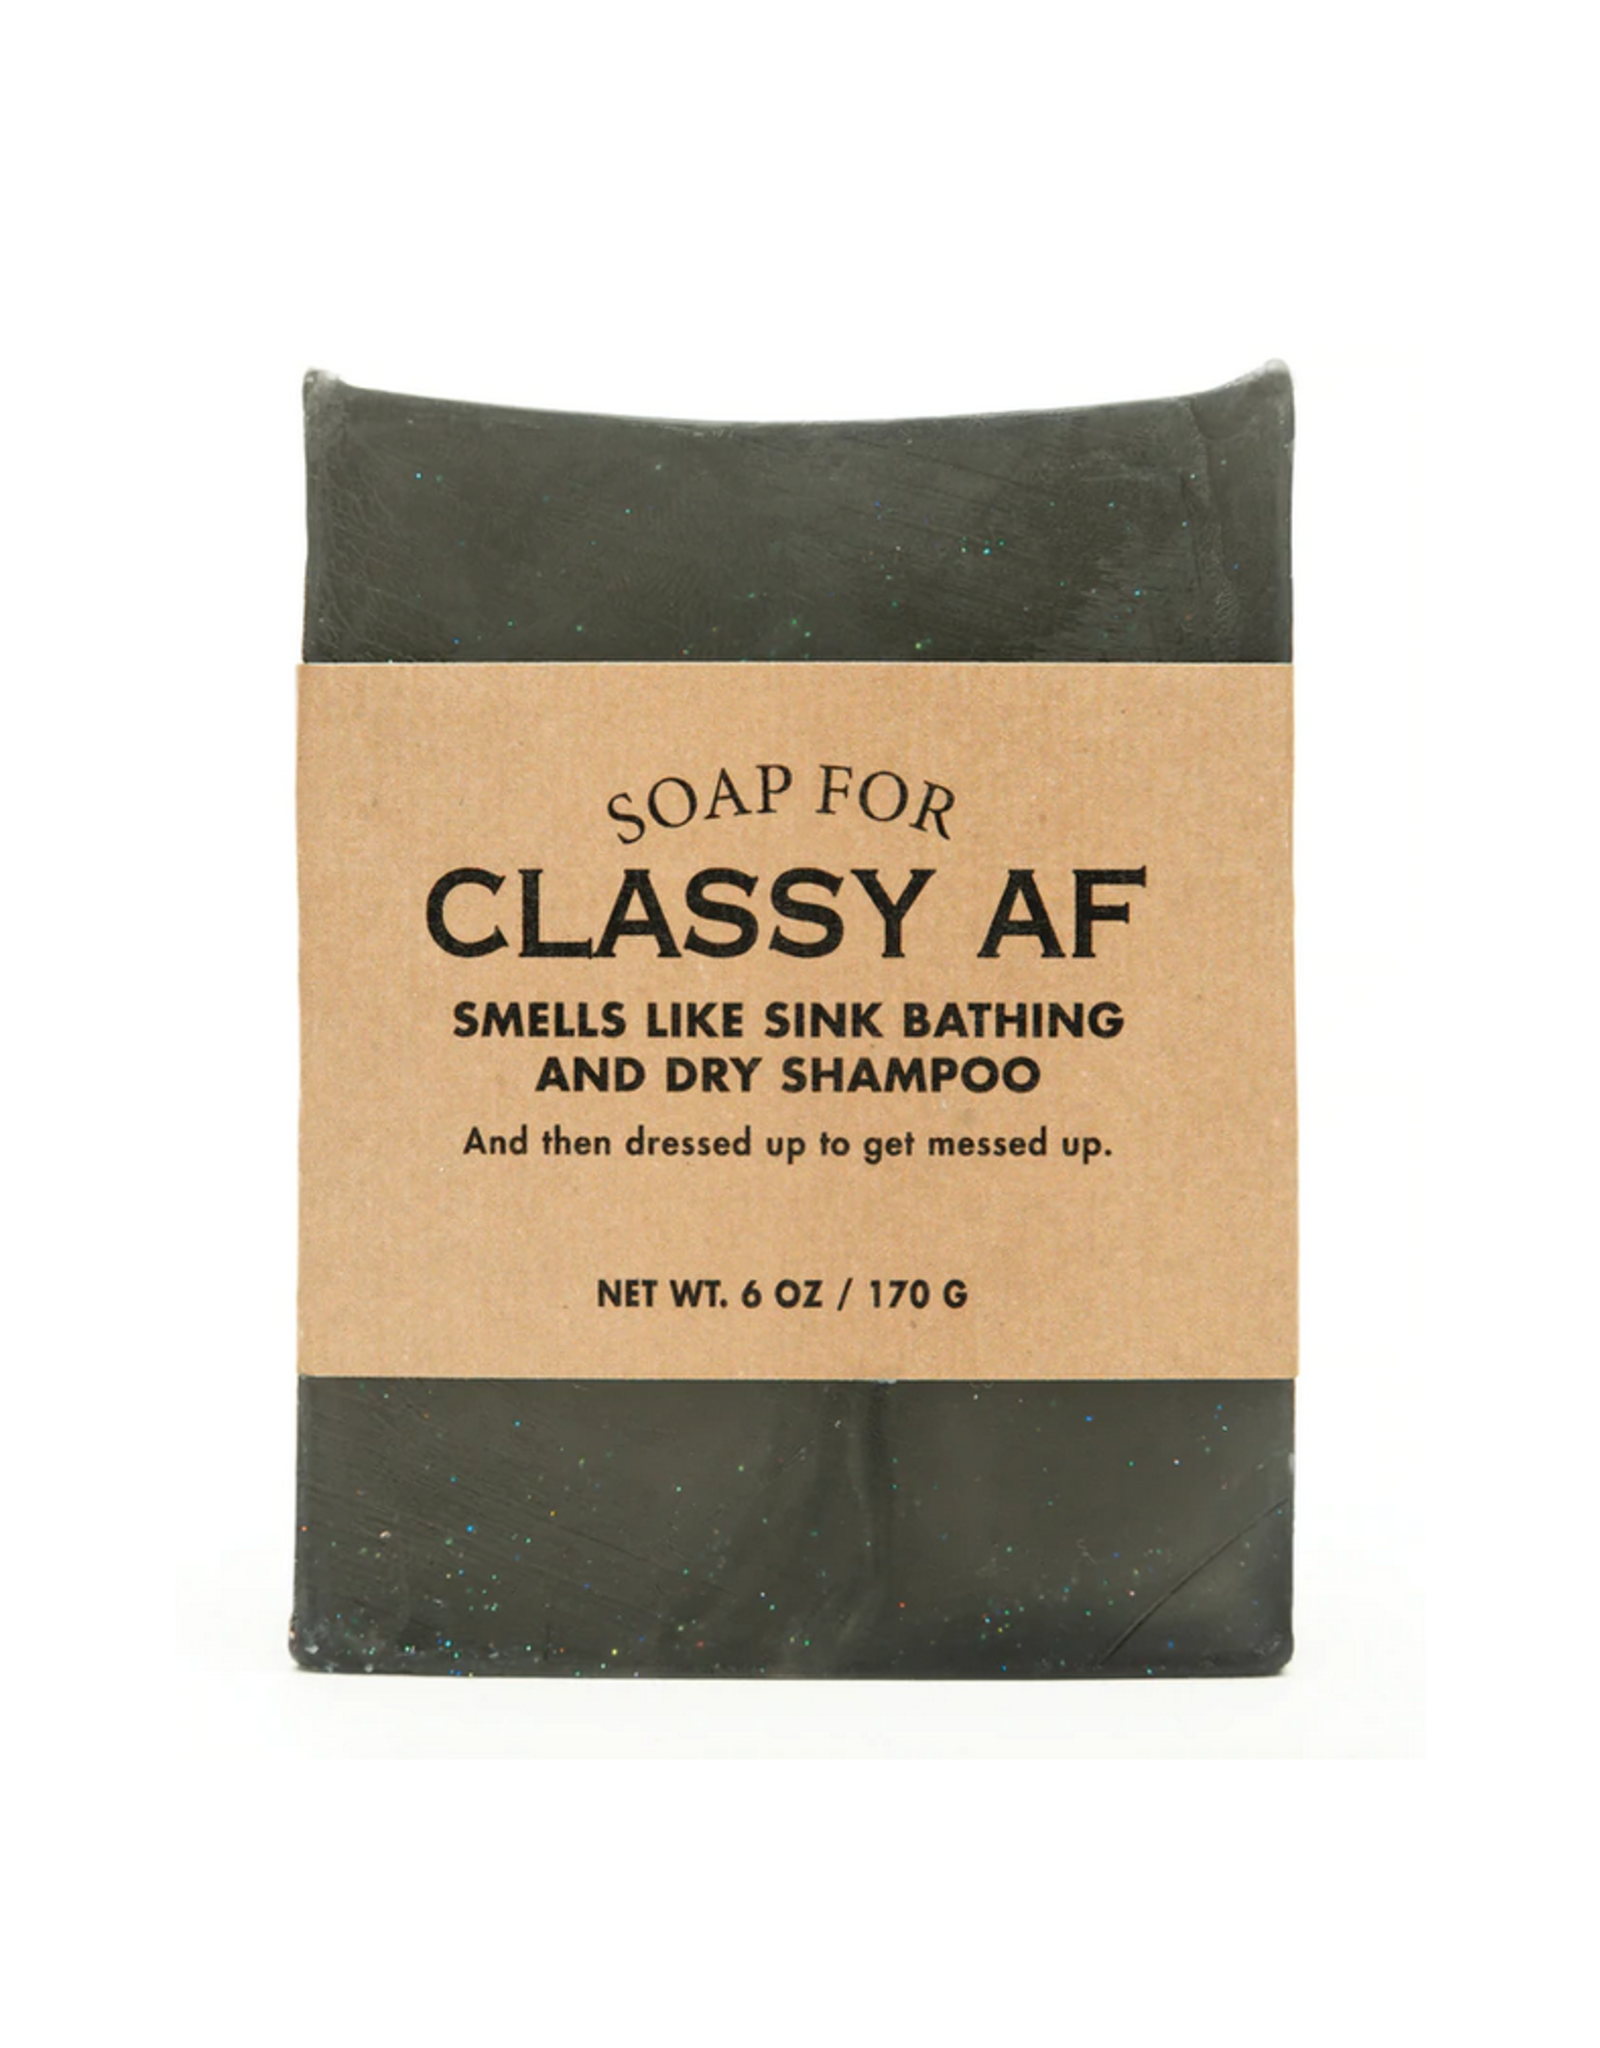 A Soap for Classy AF